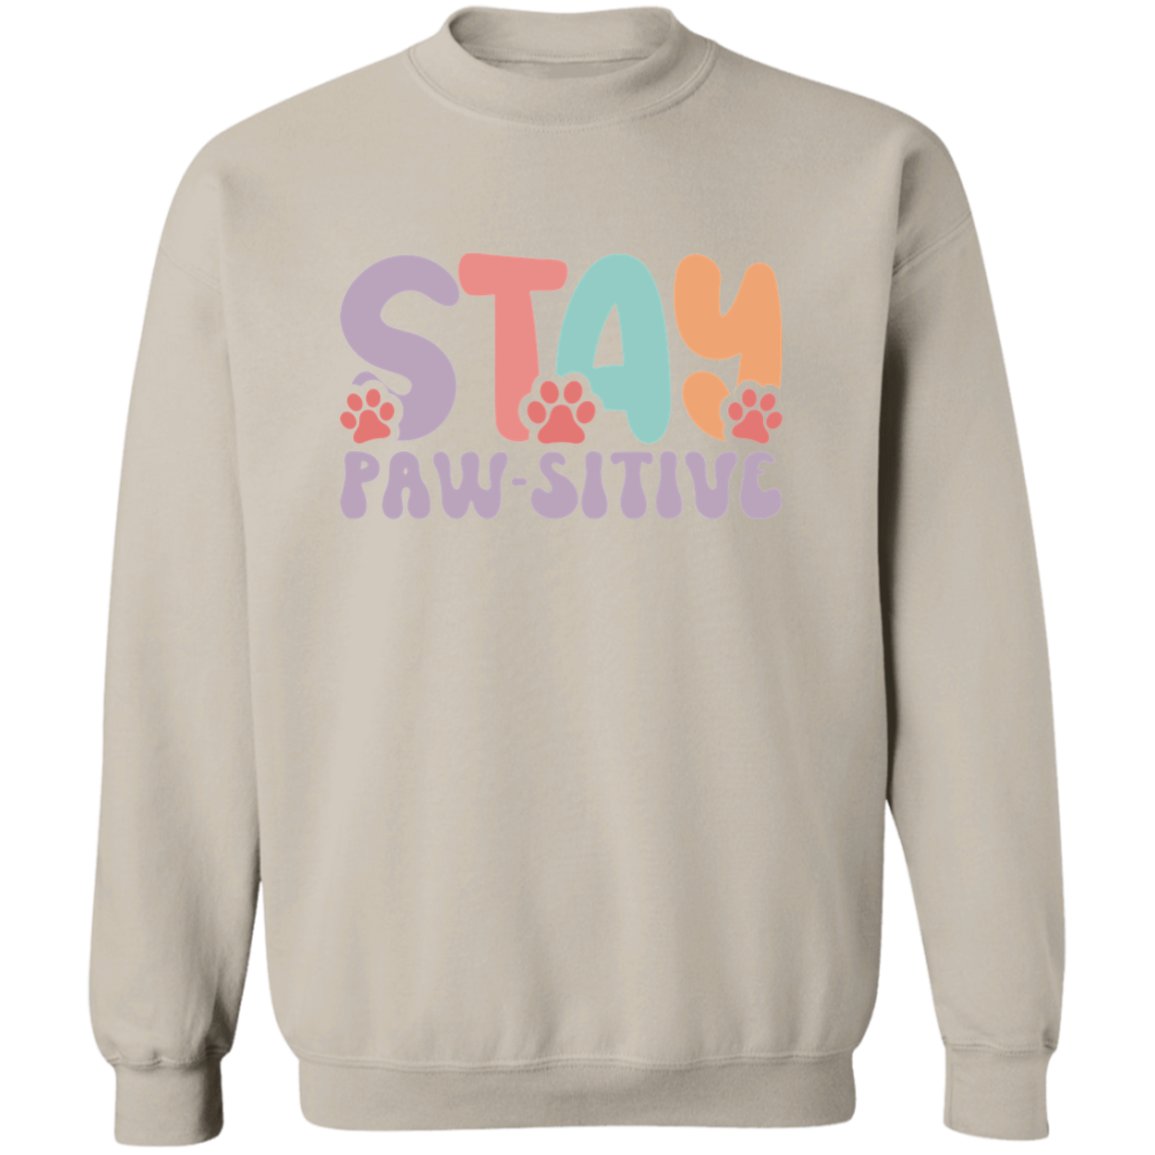 Stay Pawsitive Dog Rescue Crewneck Pullover Sweatshirt